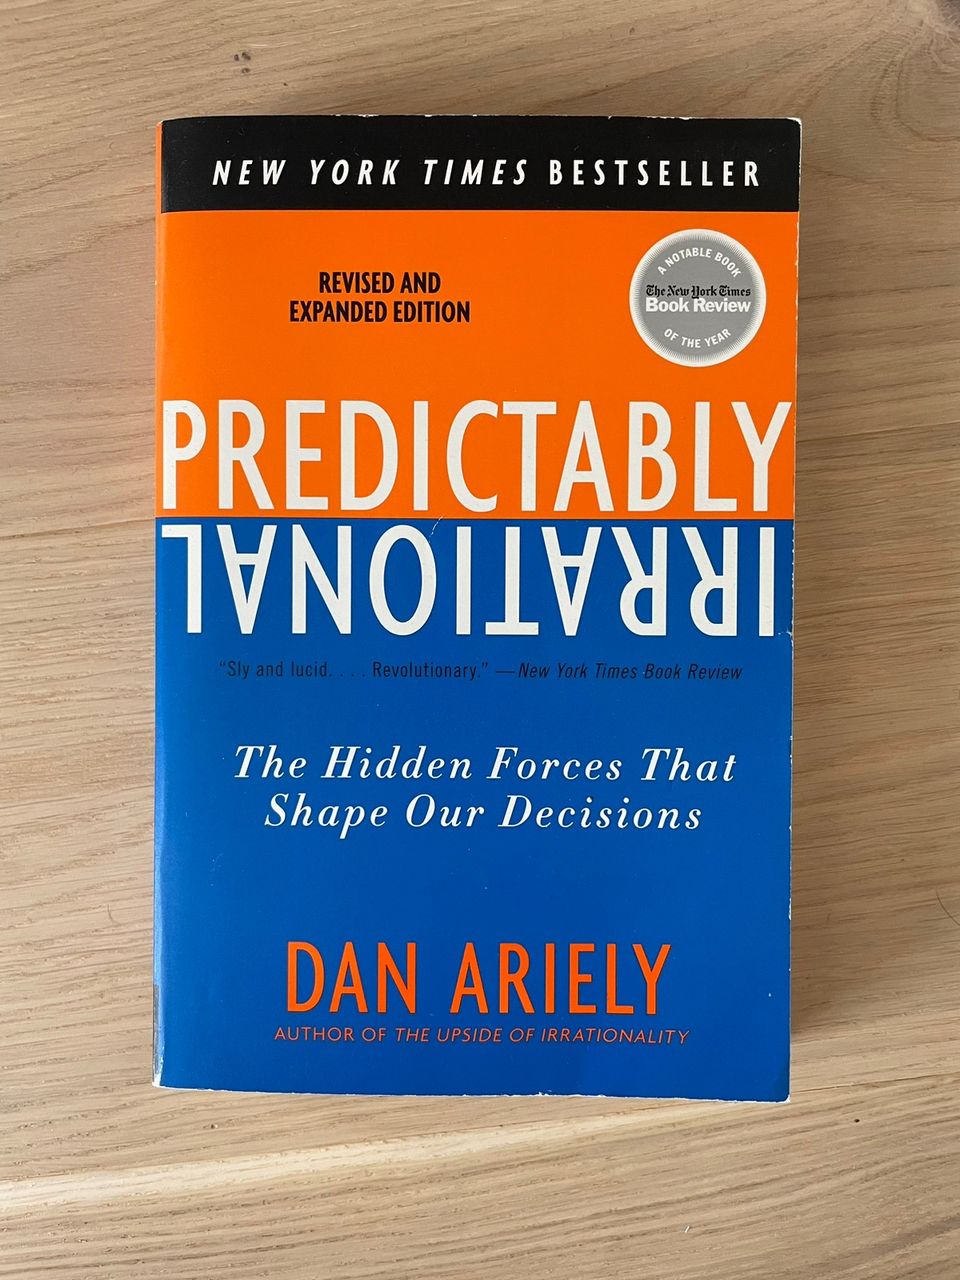 Predictably irrational – The Hidden Forces That Shape Our Decisions